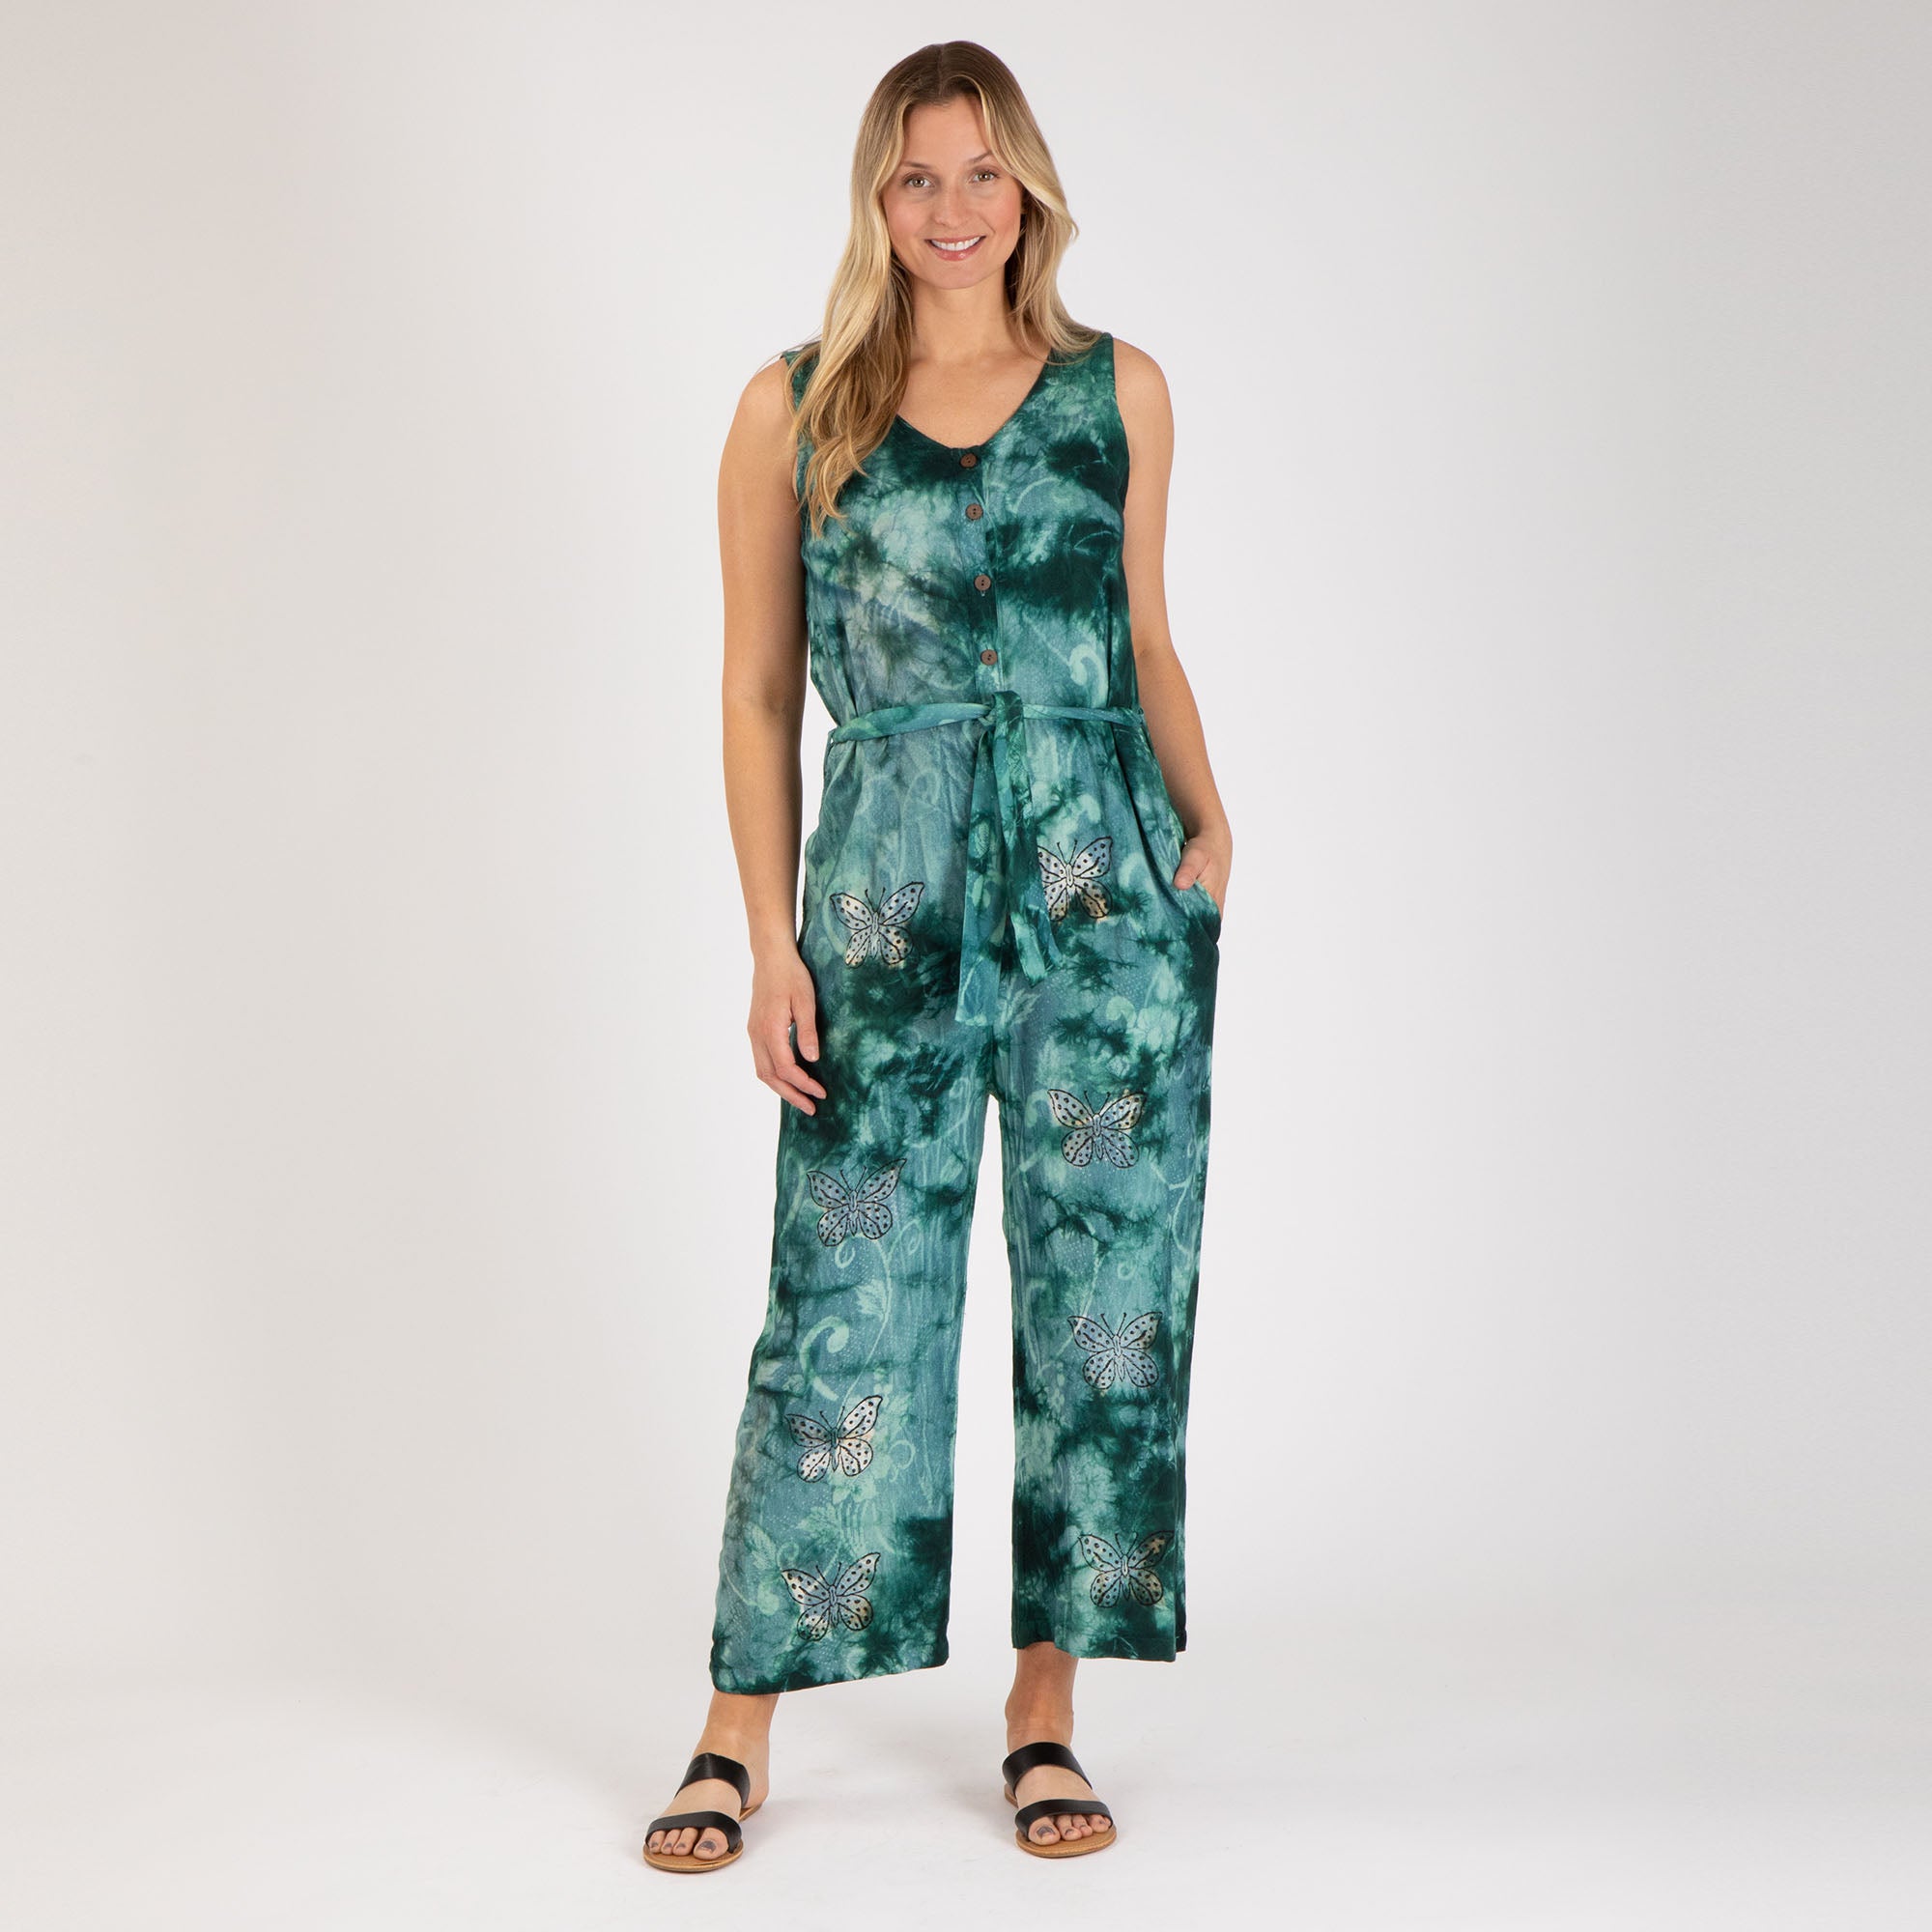 Butterflies In Bloom Hand Crafted Jumpsuit - 1X